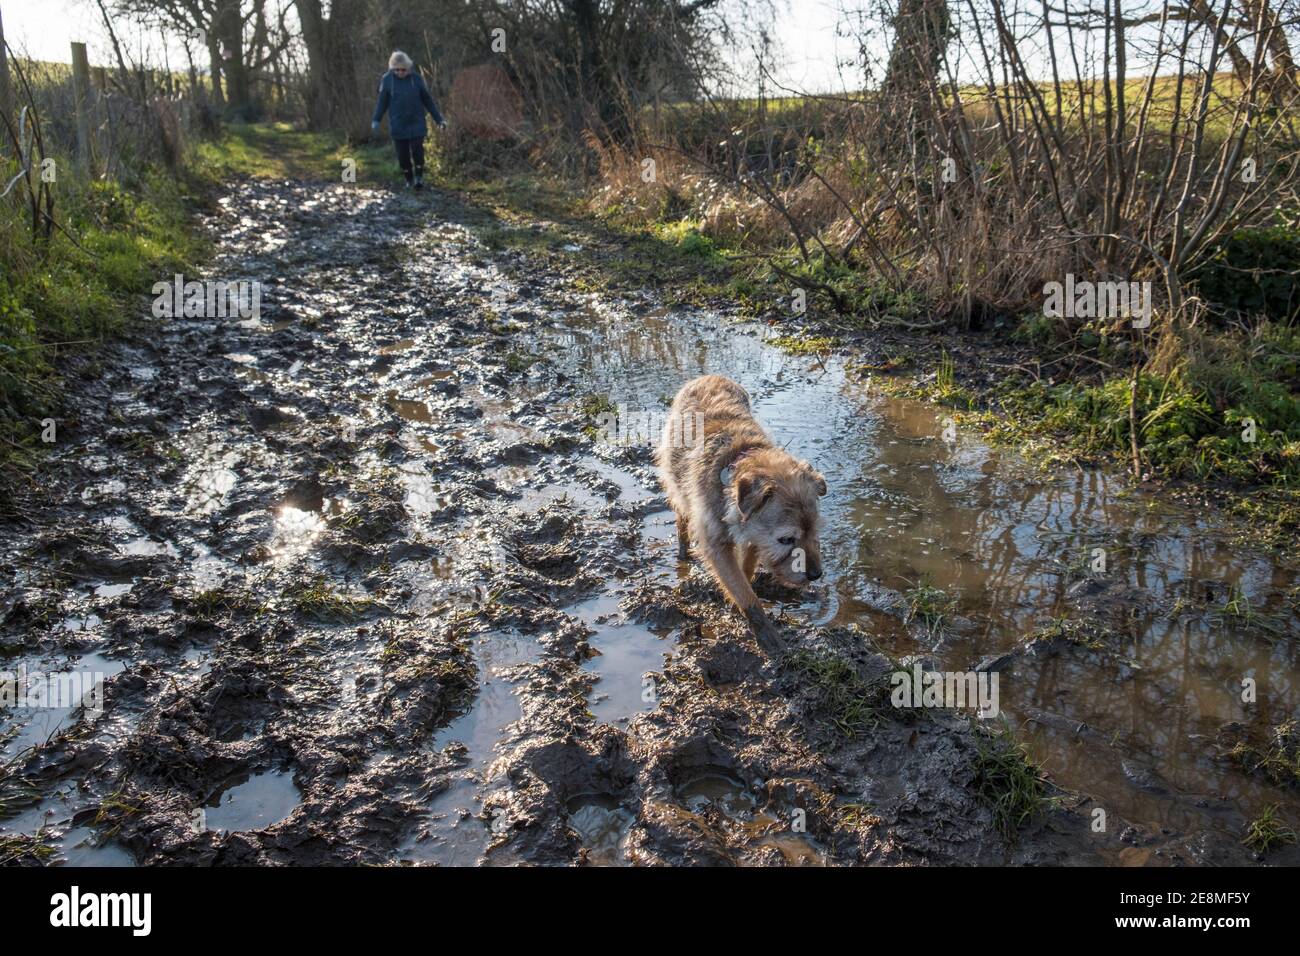 Dog walking. Wet and muddy dog walk on a muddy  footpath. Suffolk, UK. The terrier is a Border / Jack Russel cross age 17 years. Stock Photo